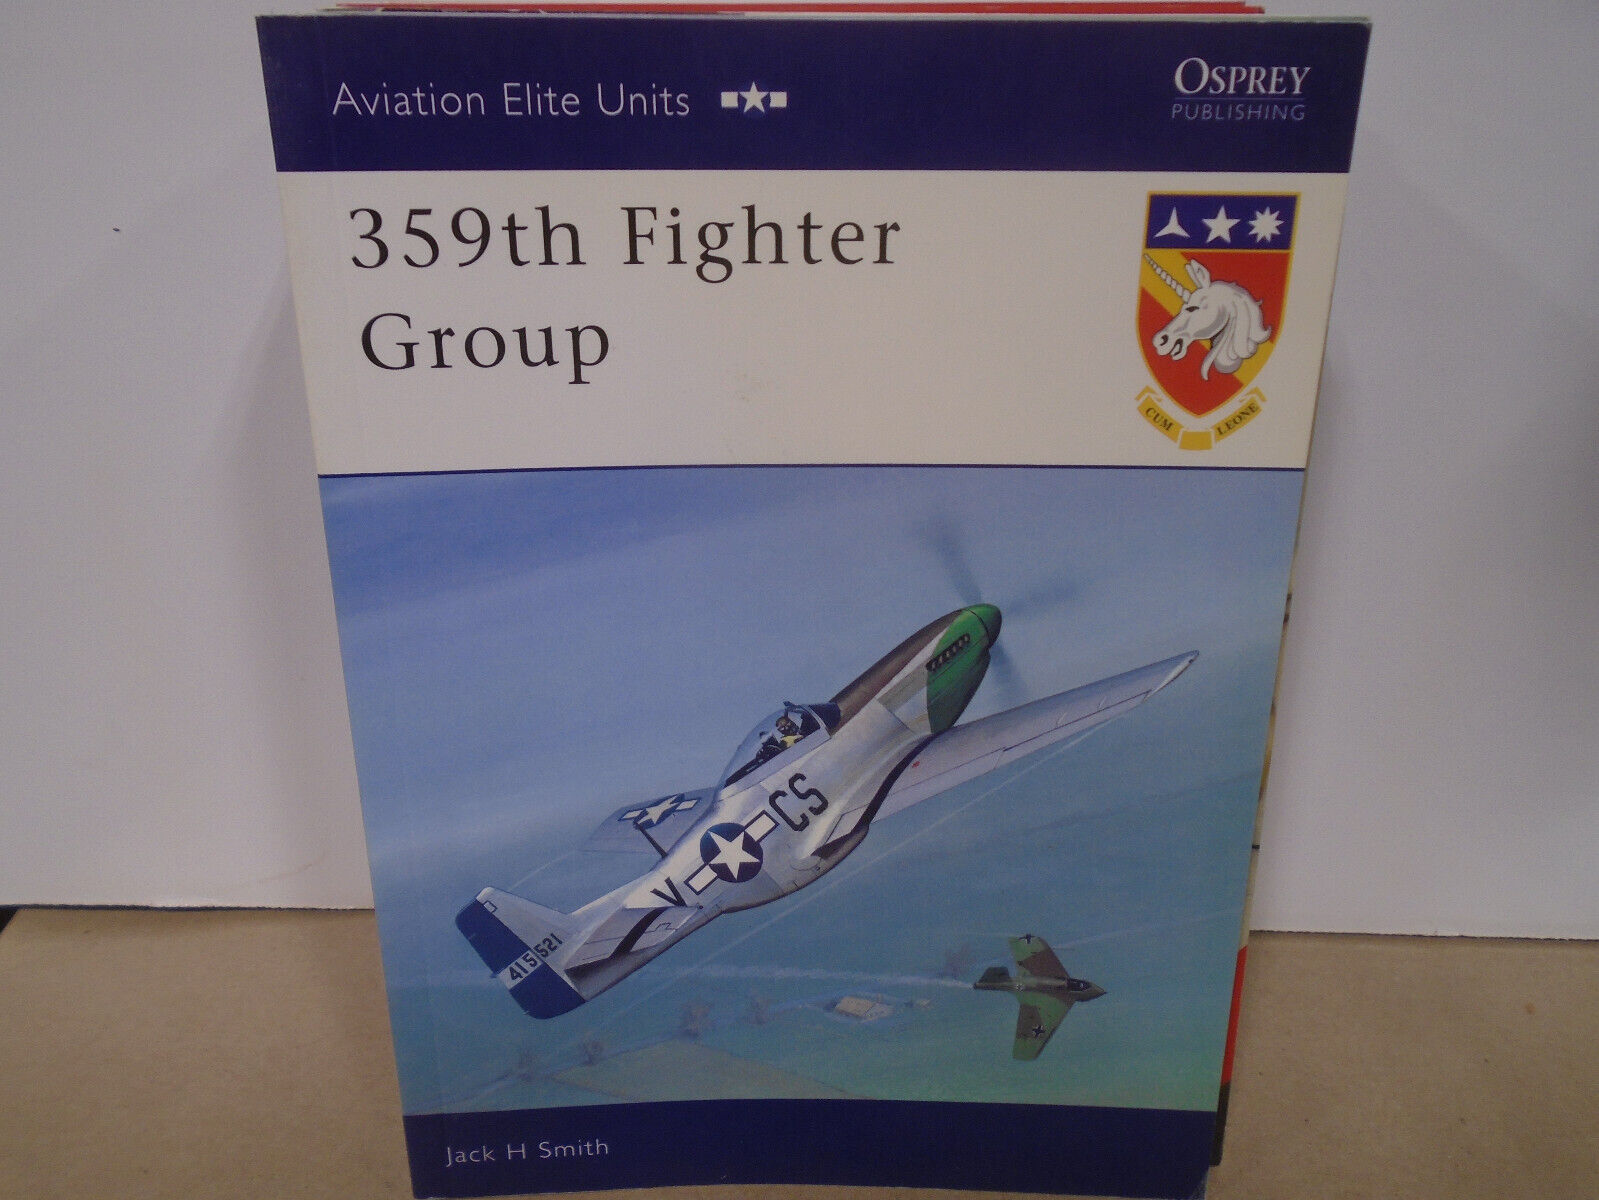 OSPREY AVIATION ELITE UNITS 10 359TH FIGHTER GROUP BY JACK H SMITH NEW CONDITION